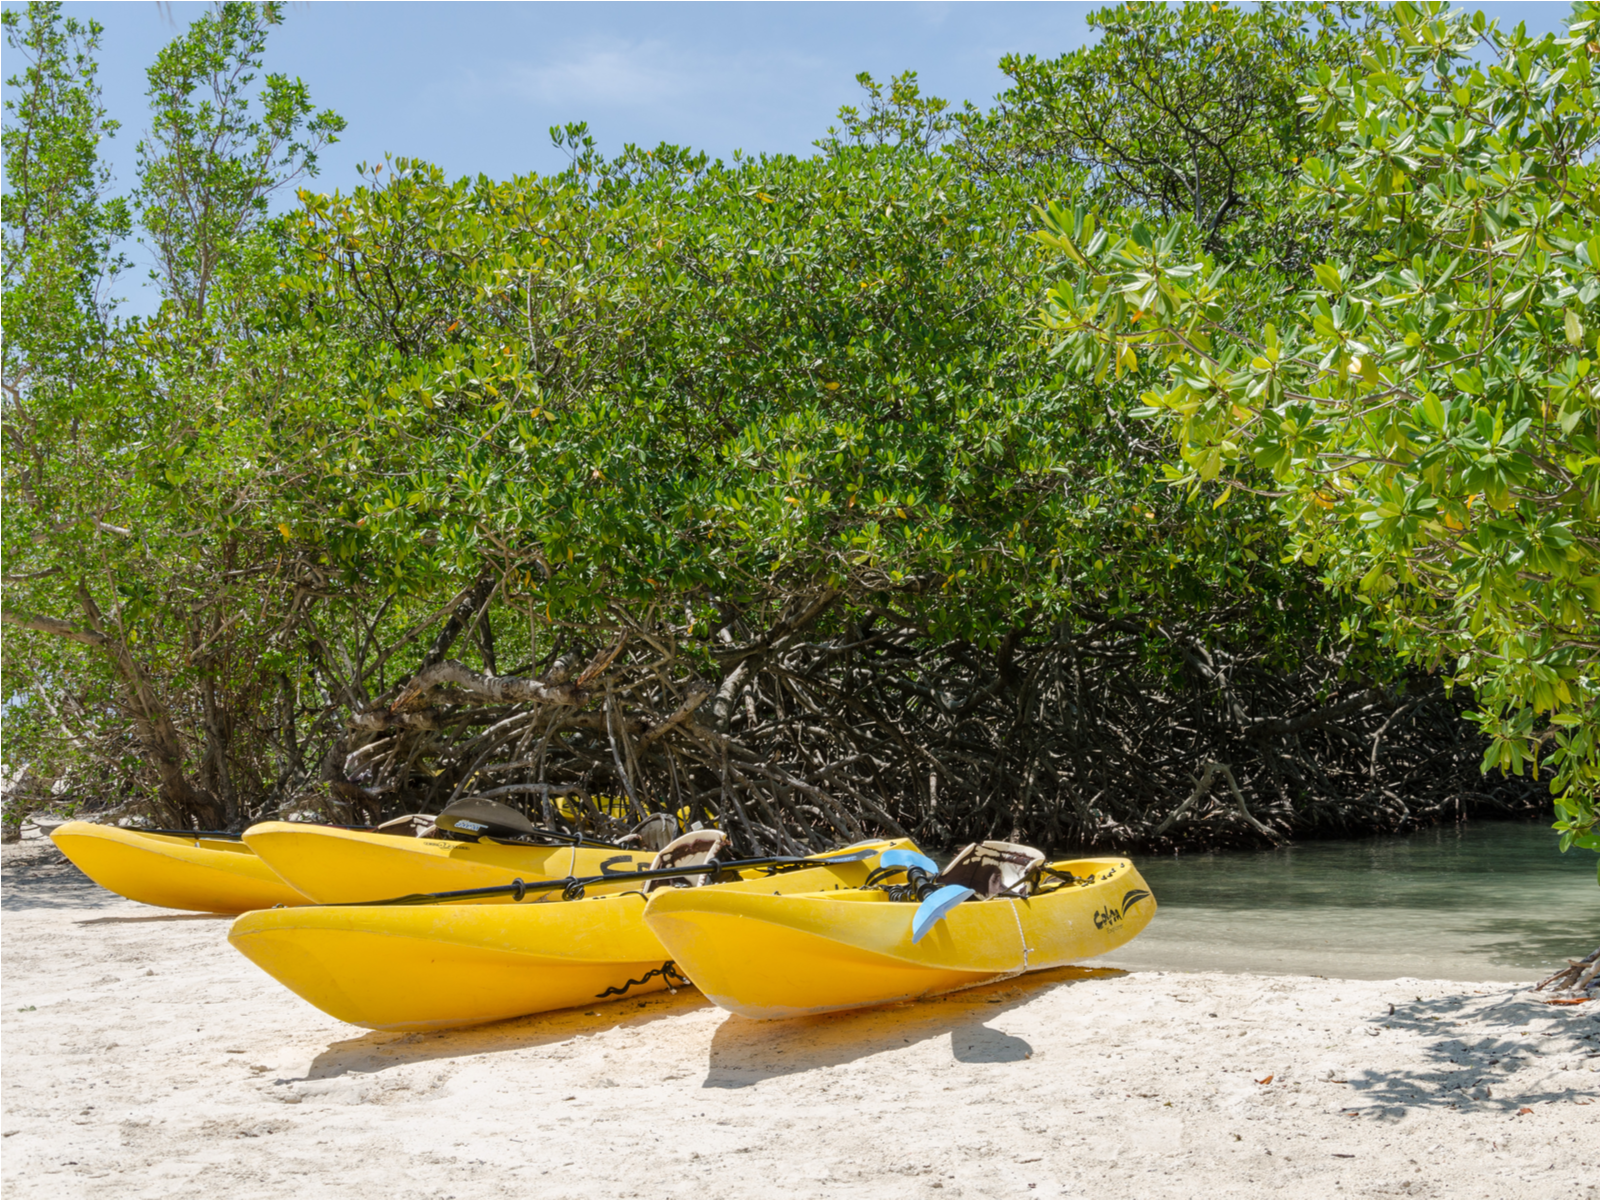 Four Kayak Boats on the shore of Mangel Halto Beach, one of the best beaches in Aruba, with thick layers of green Mangroves